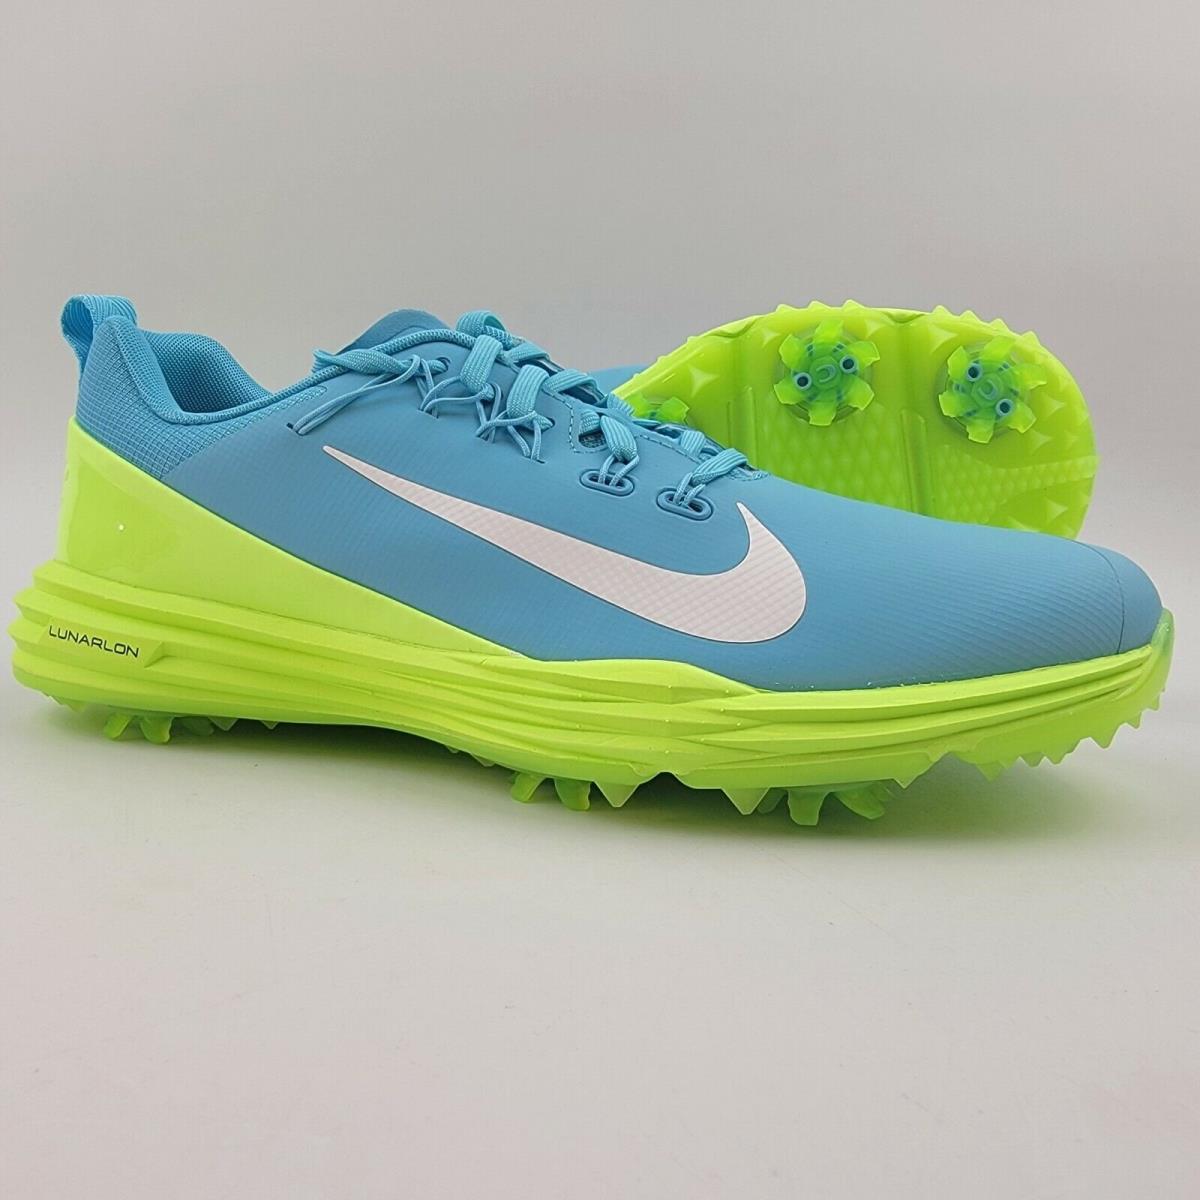 Nike Lunar Command 2 Golf Shoes Cleats Sky Blue Ghost Green 880120-400 Womens 6